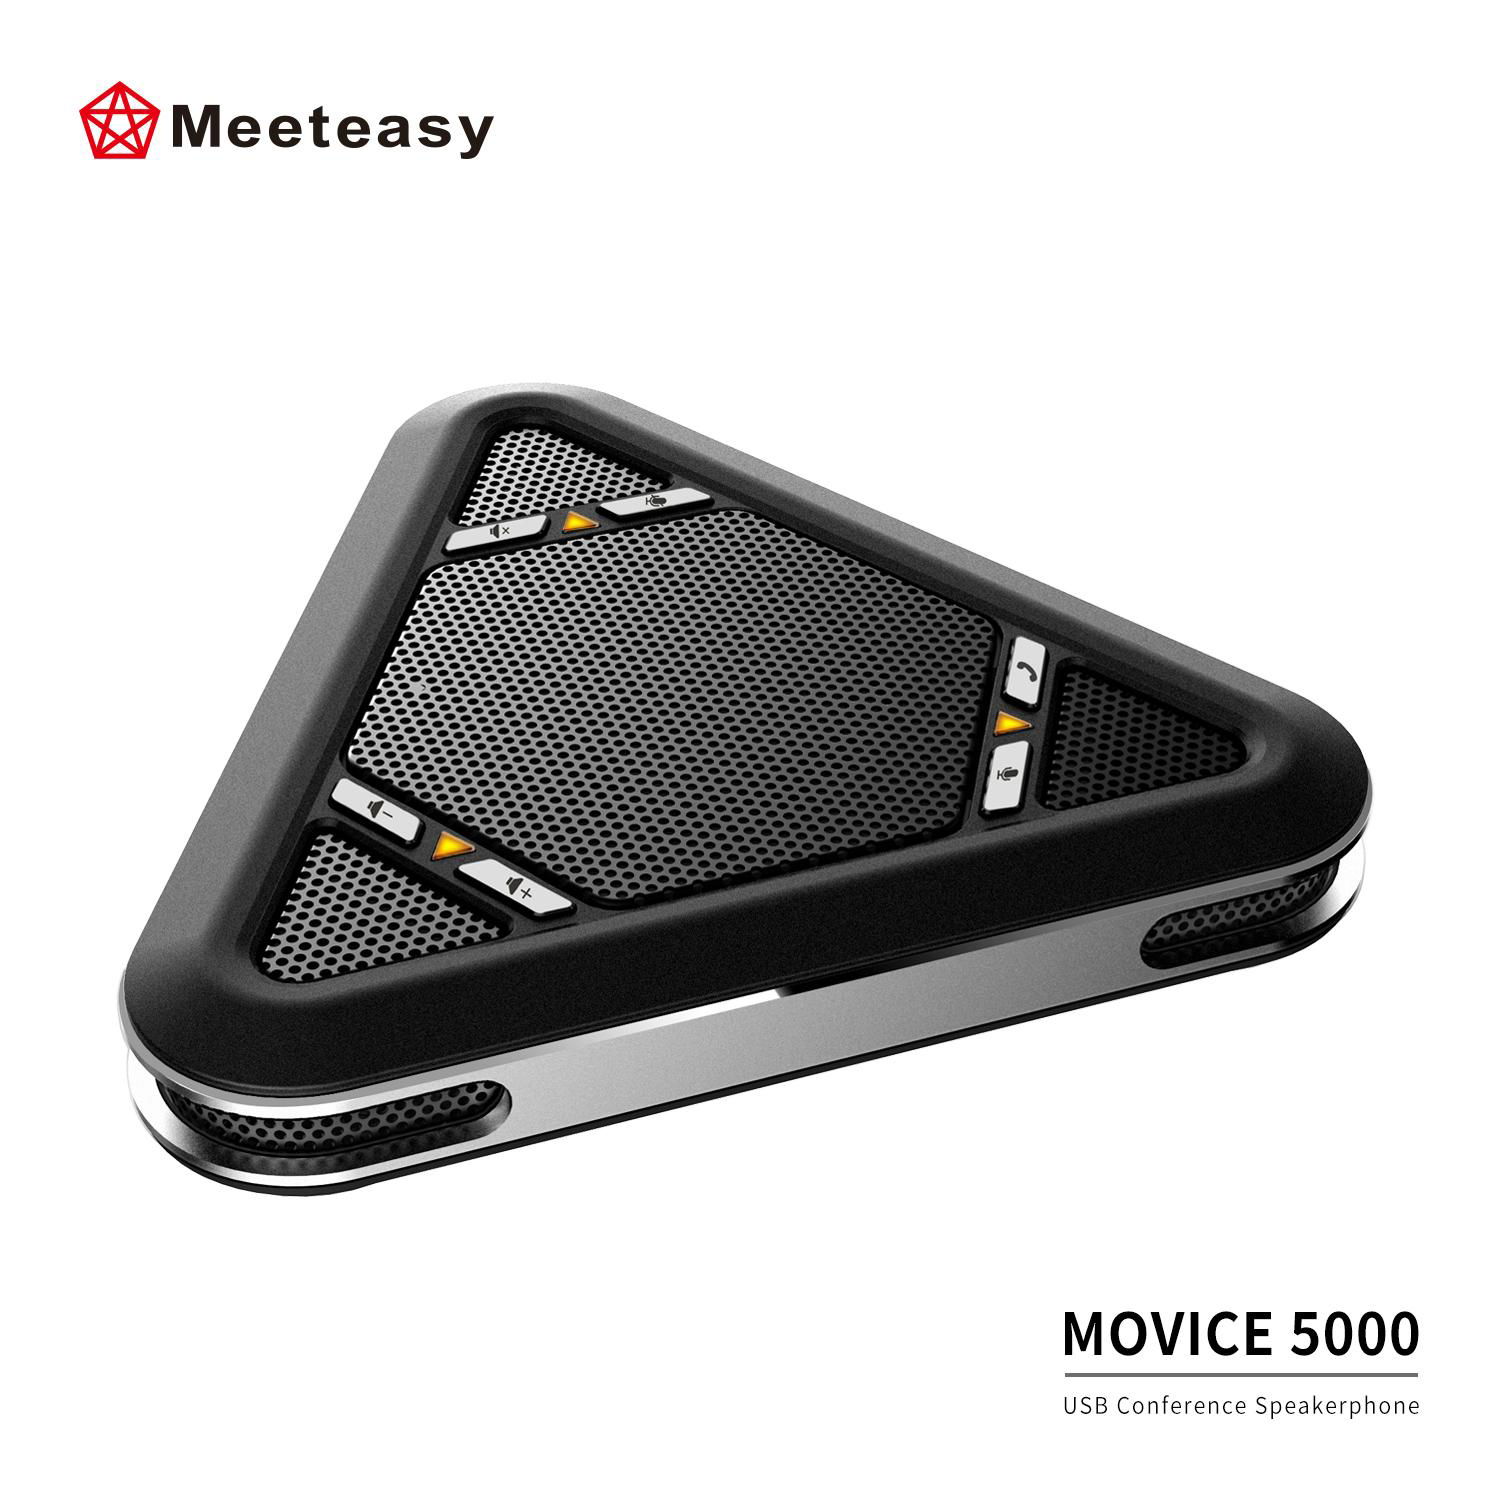 Meeteasy MVOICE 5000 USB Conference Speakerphone for Online Conference Solution 4